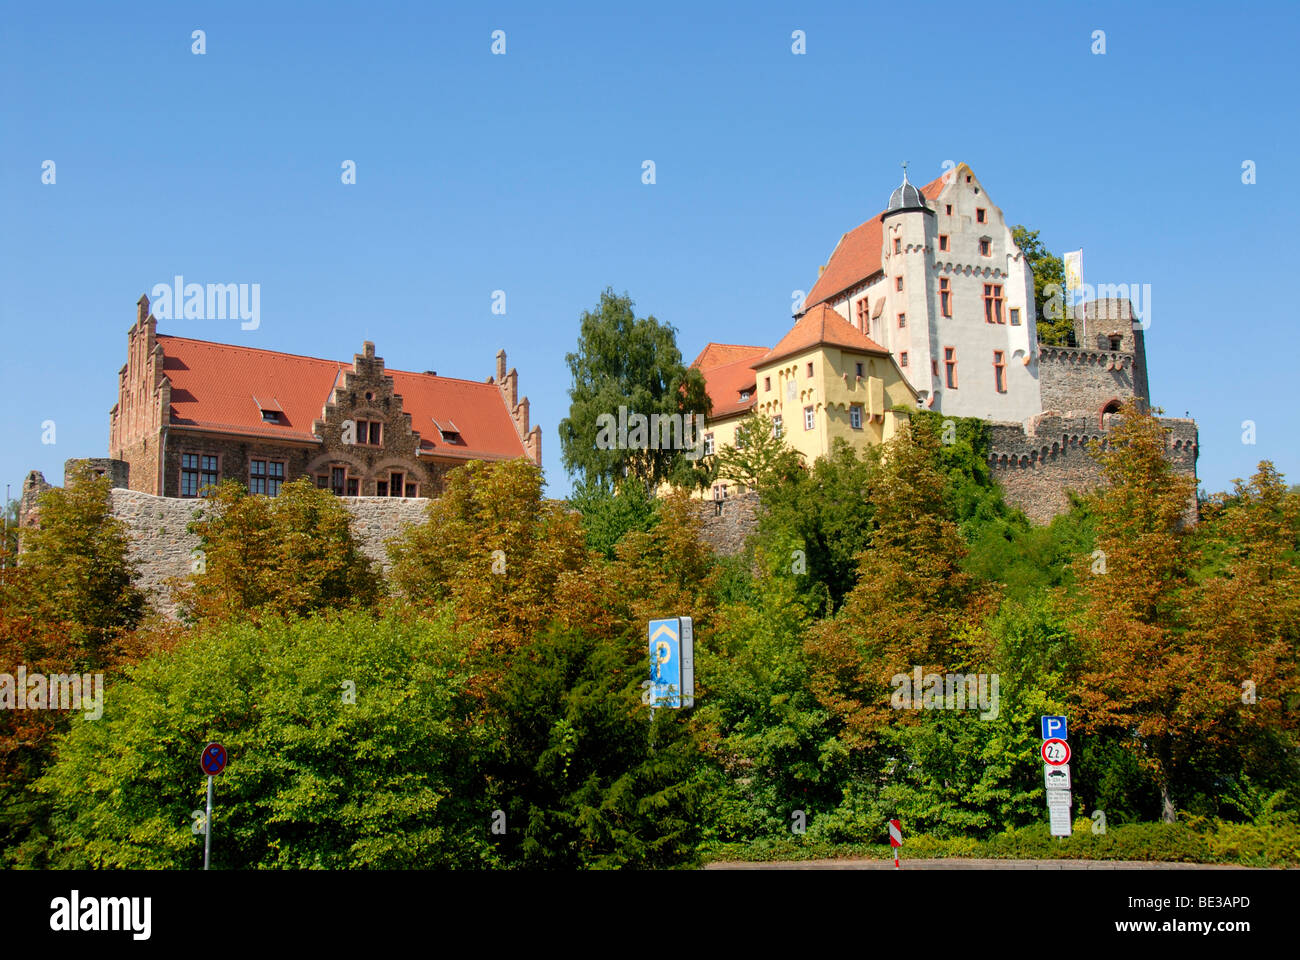 Outer castle, defence wall and the great hall, Old Castle, Alzenau in Lower Franconia, Spessart, Bavaria, Germany, Europe Stock Photo